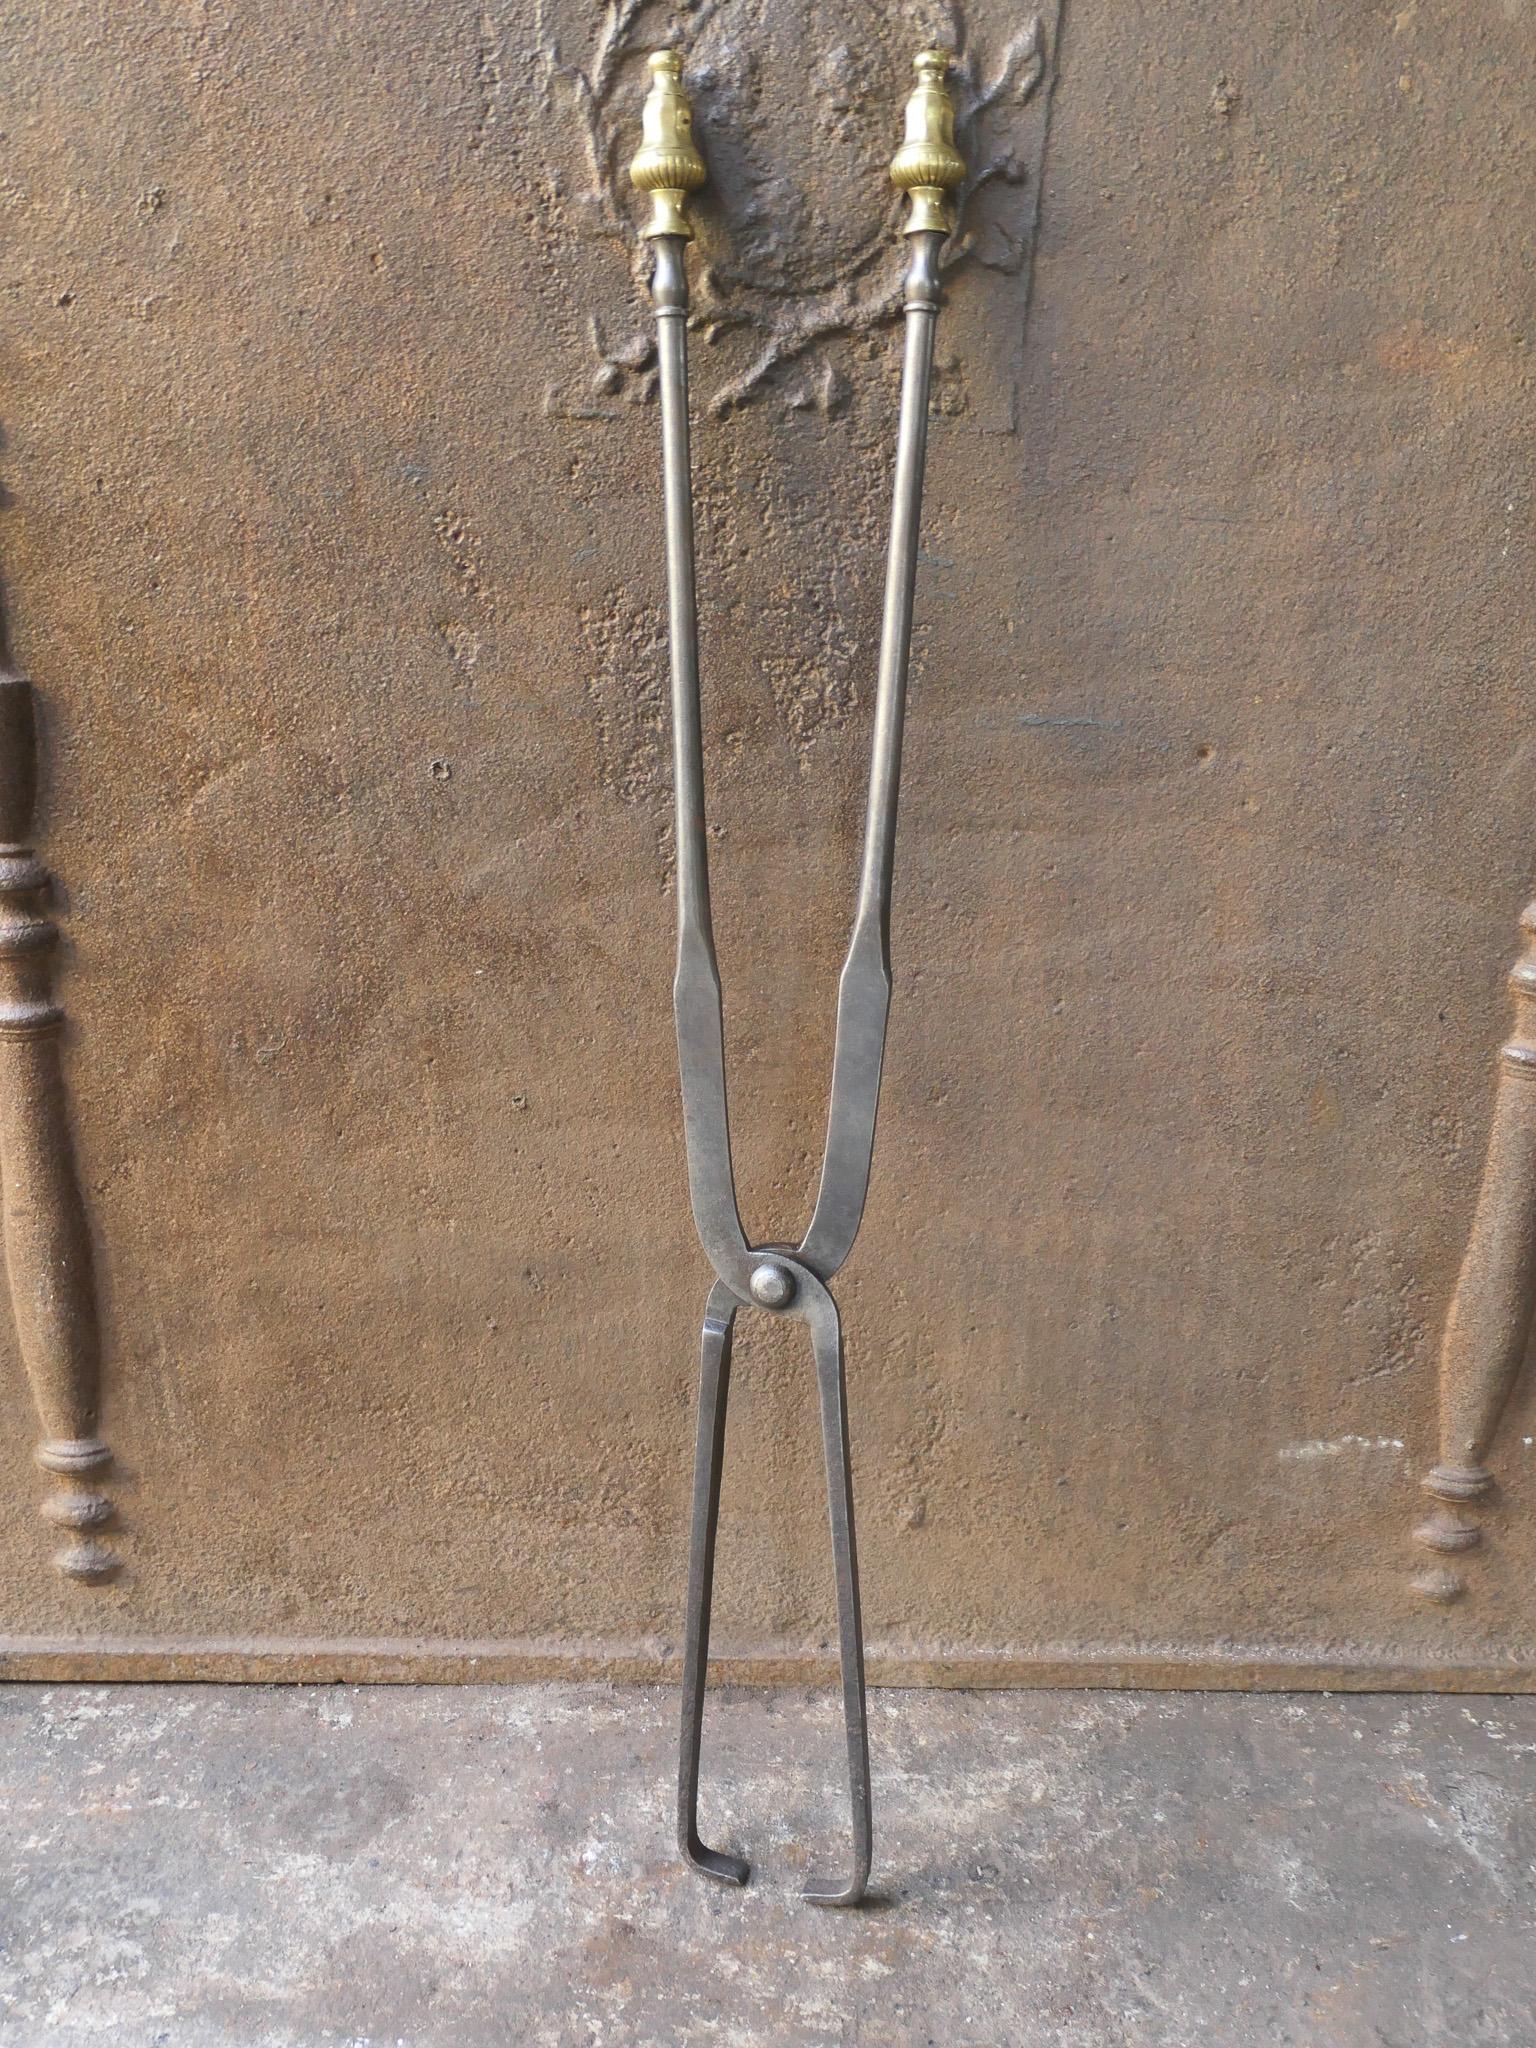 Large 19th century French Napoleon III fireplace tongs made of wrought iron. The handles are made of brass. The fire tongs are in a good condition and are fully functional.